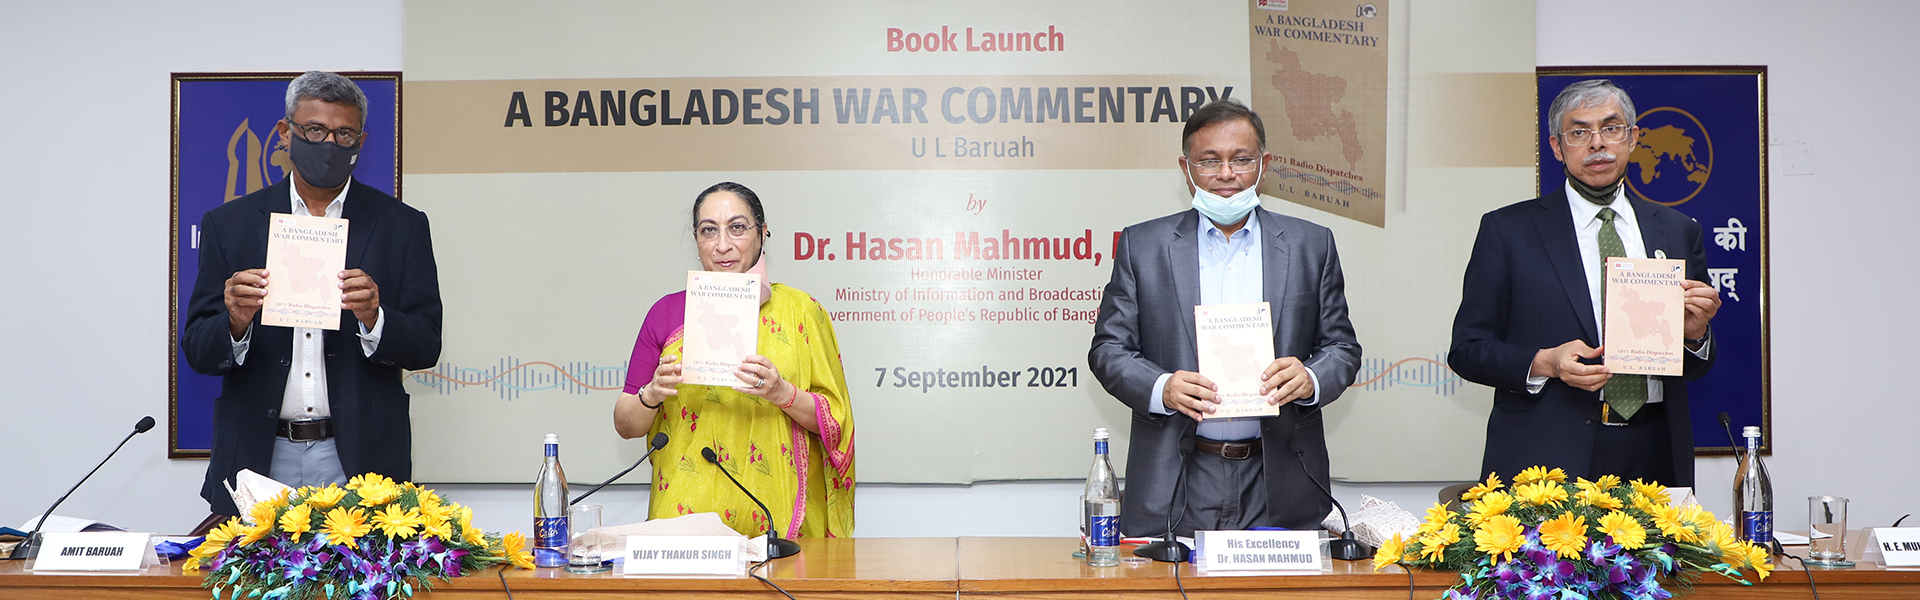 Book Launch - 